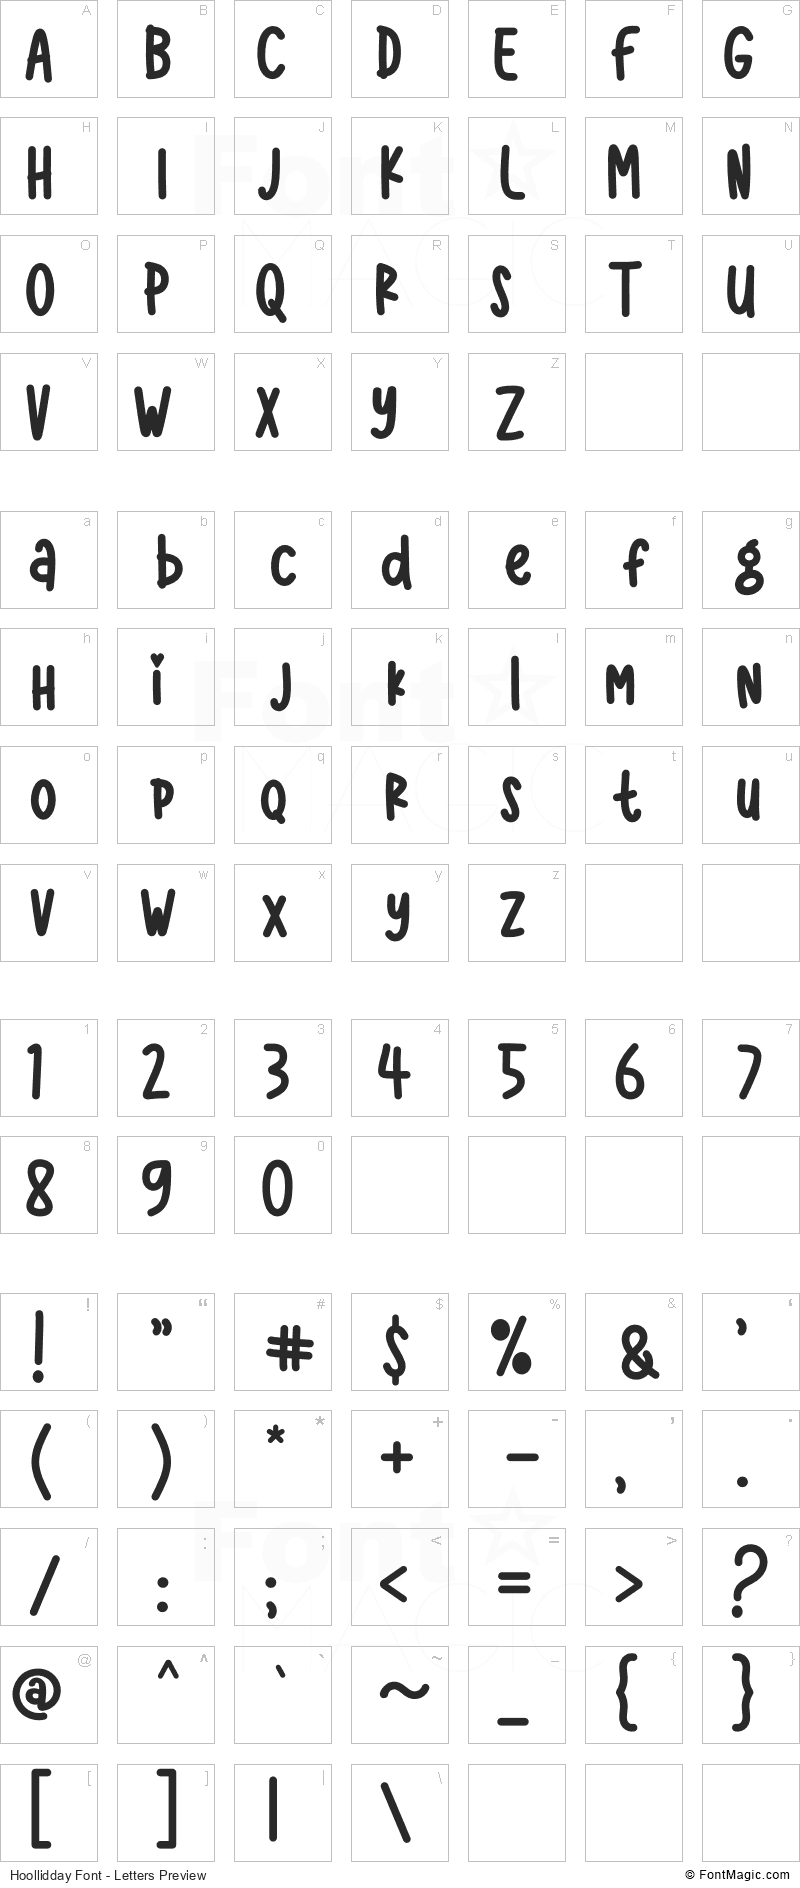 Hoollidday Font - All Latters Preview Chart